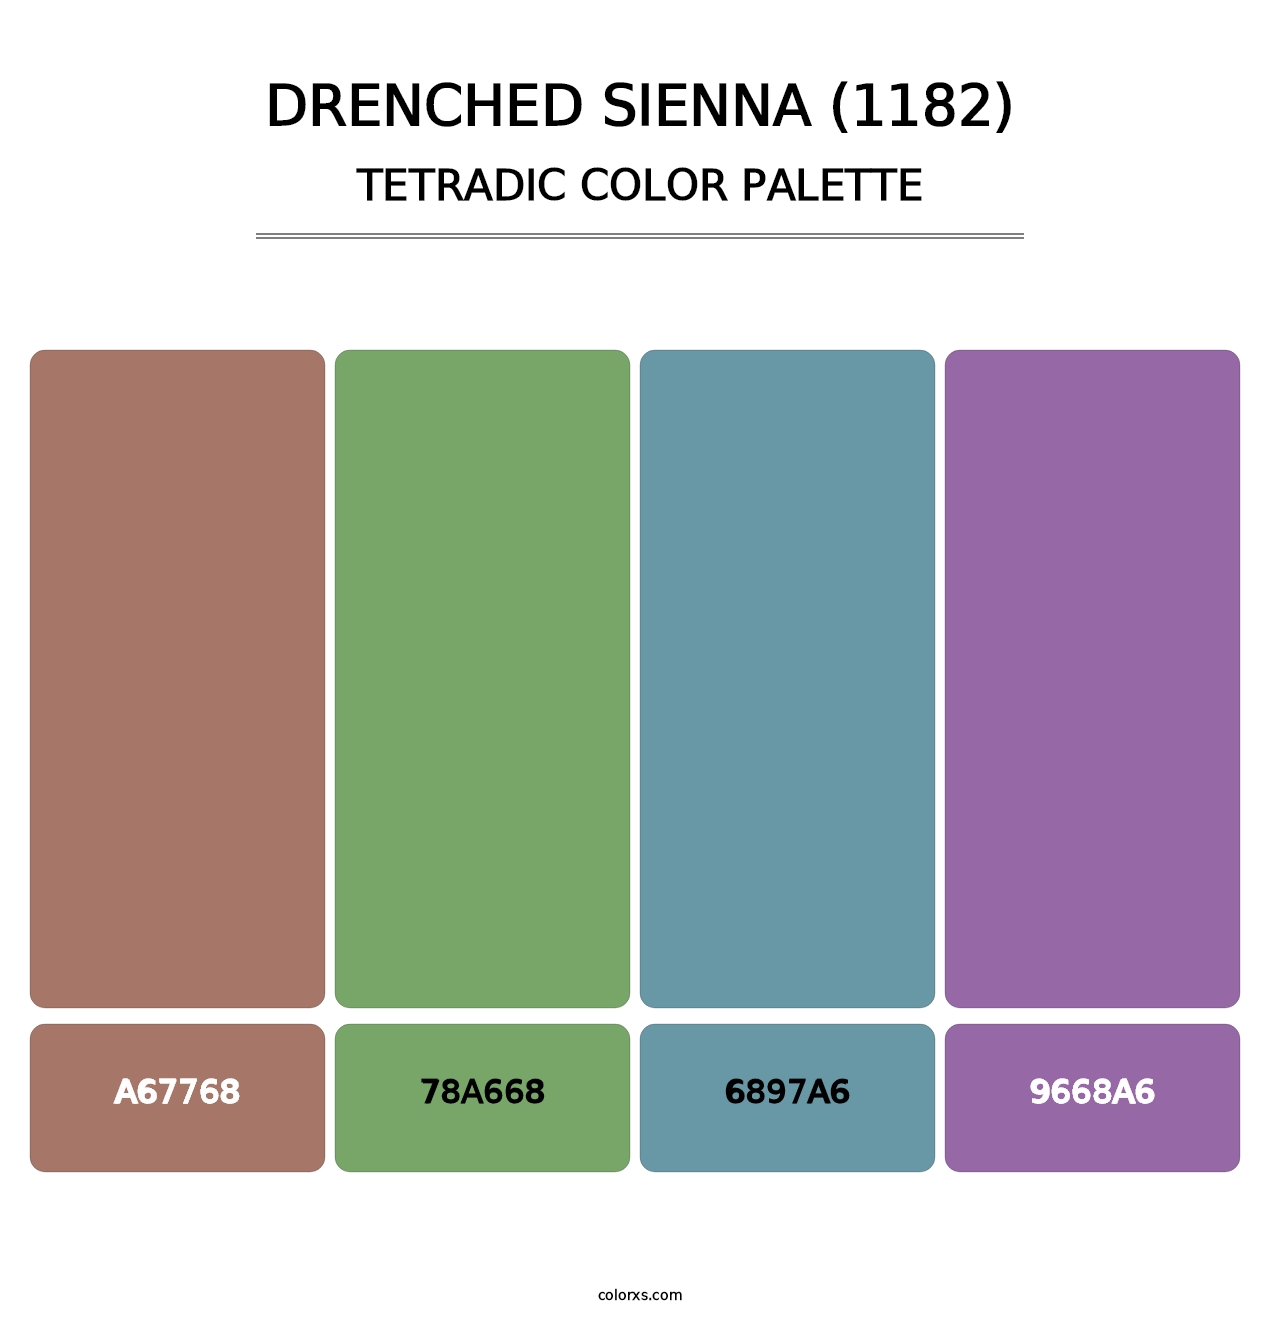 Drenched Sienna (1182) - Tetradic Color Palette